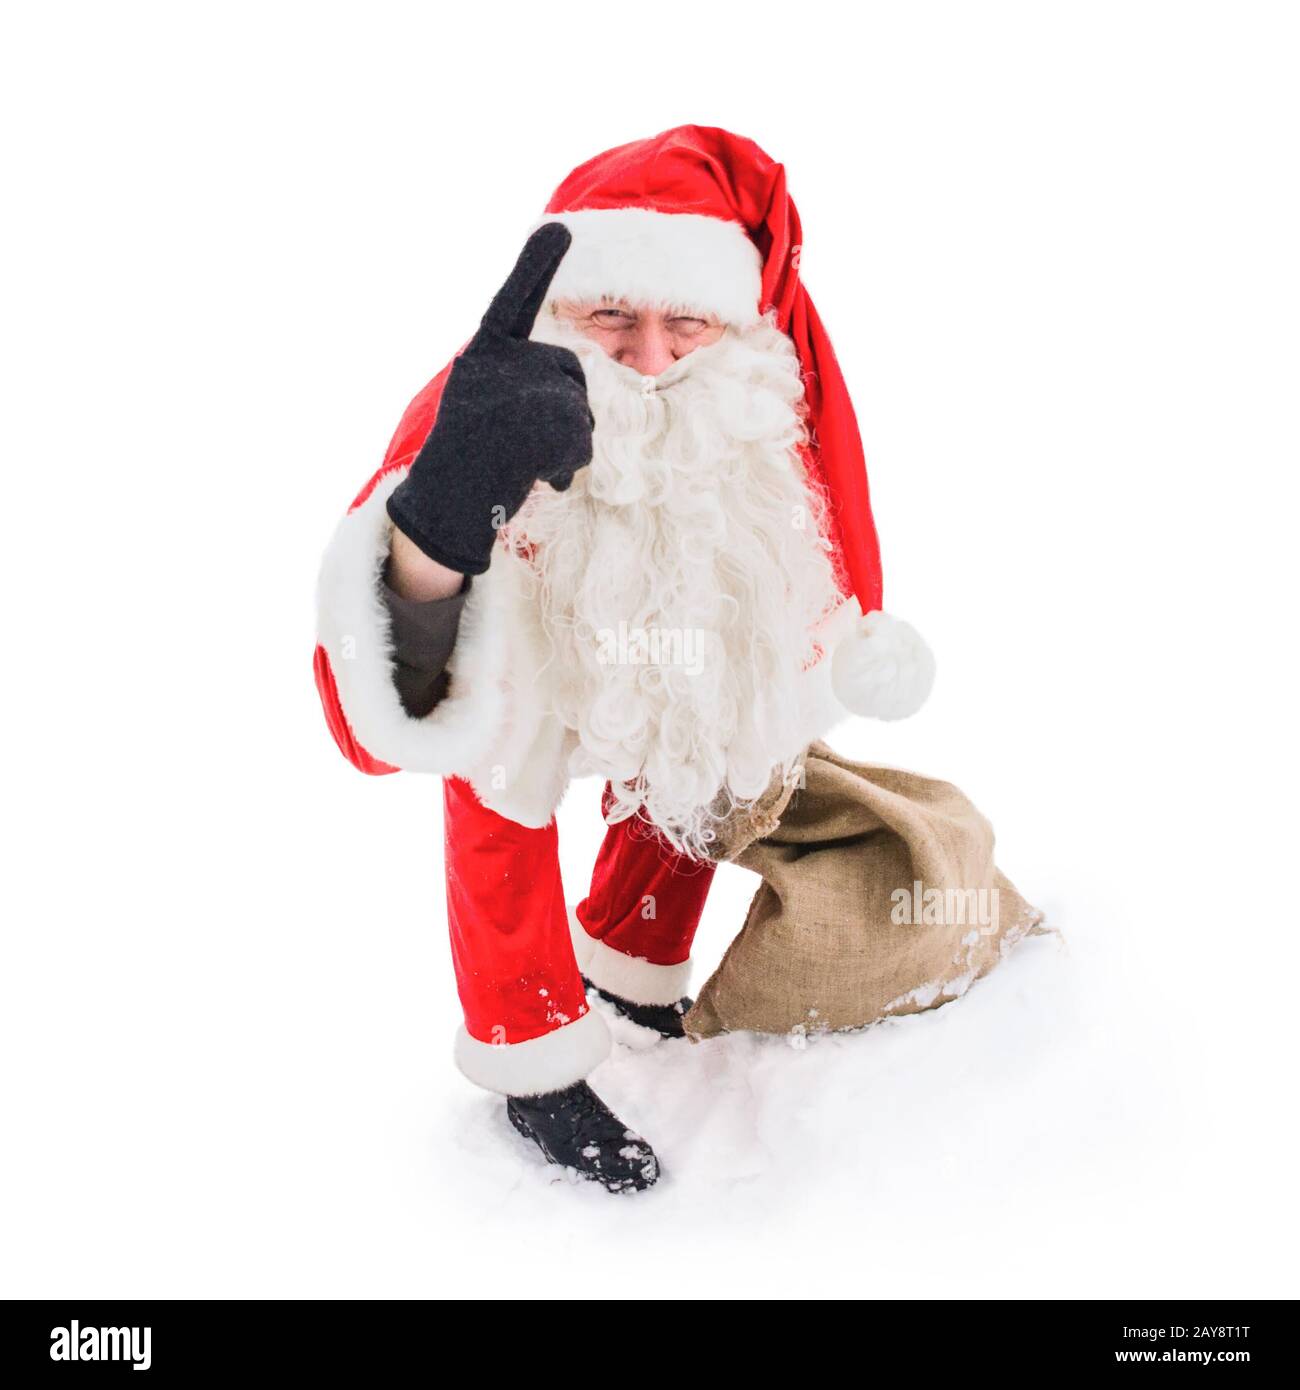 Santa Claus pointing with his index finger up. Isolated on white background. Stock Photo